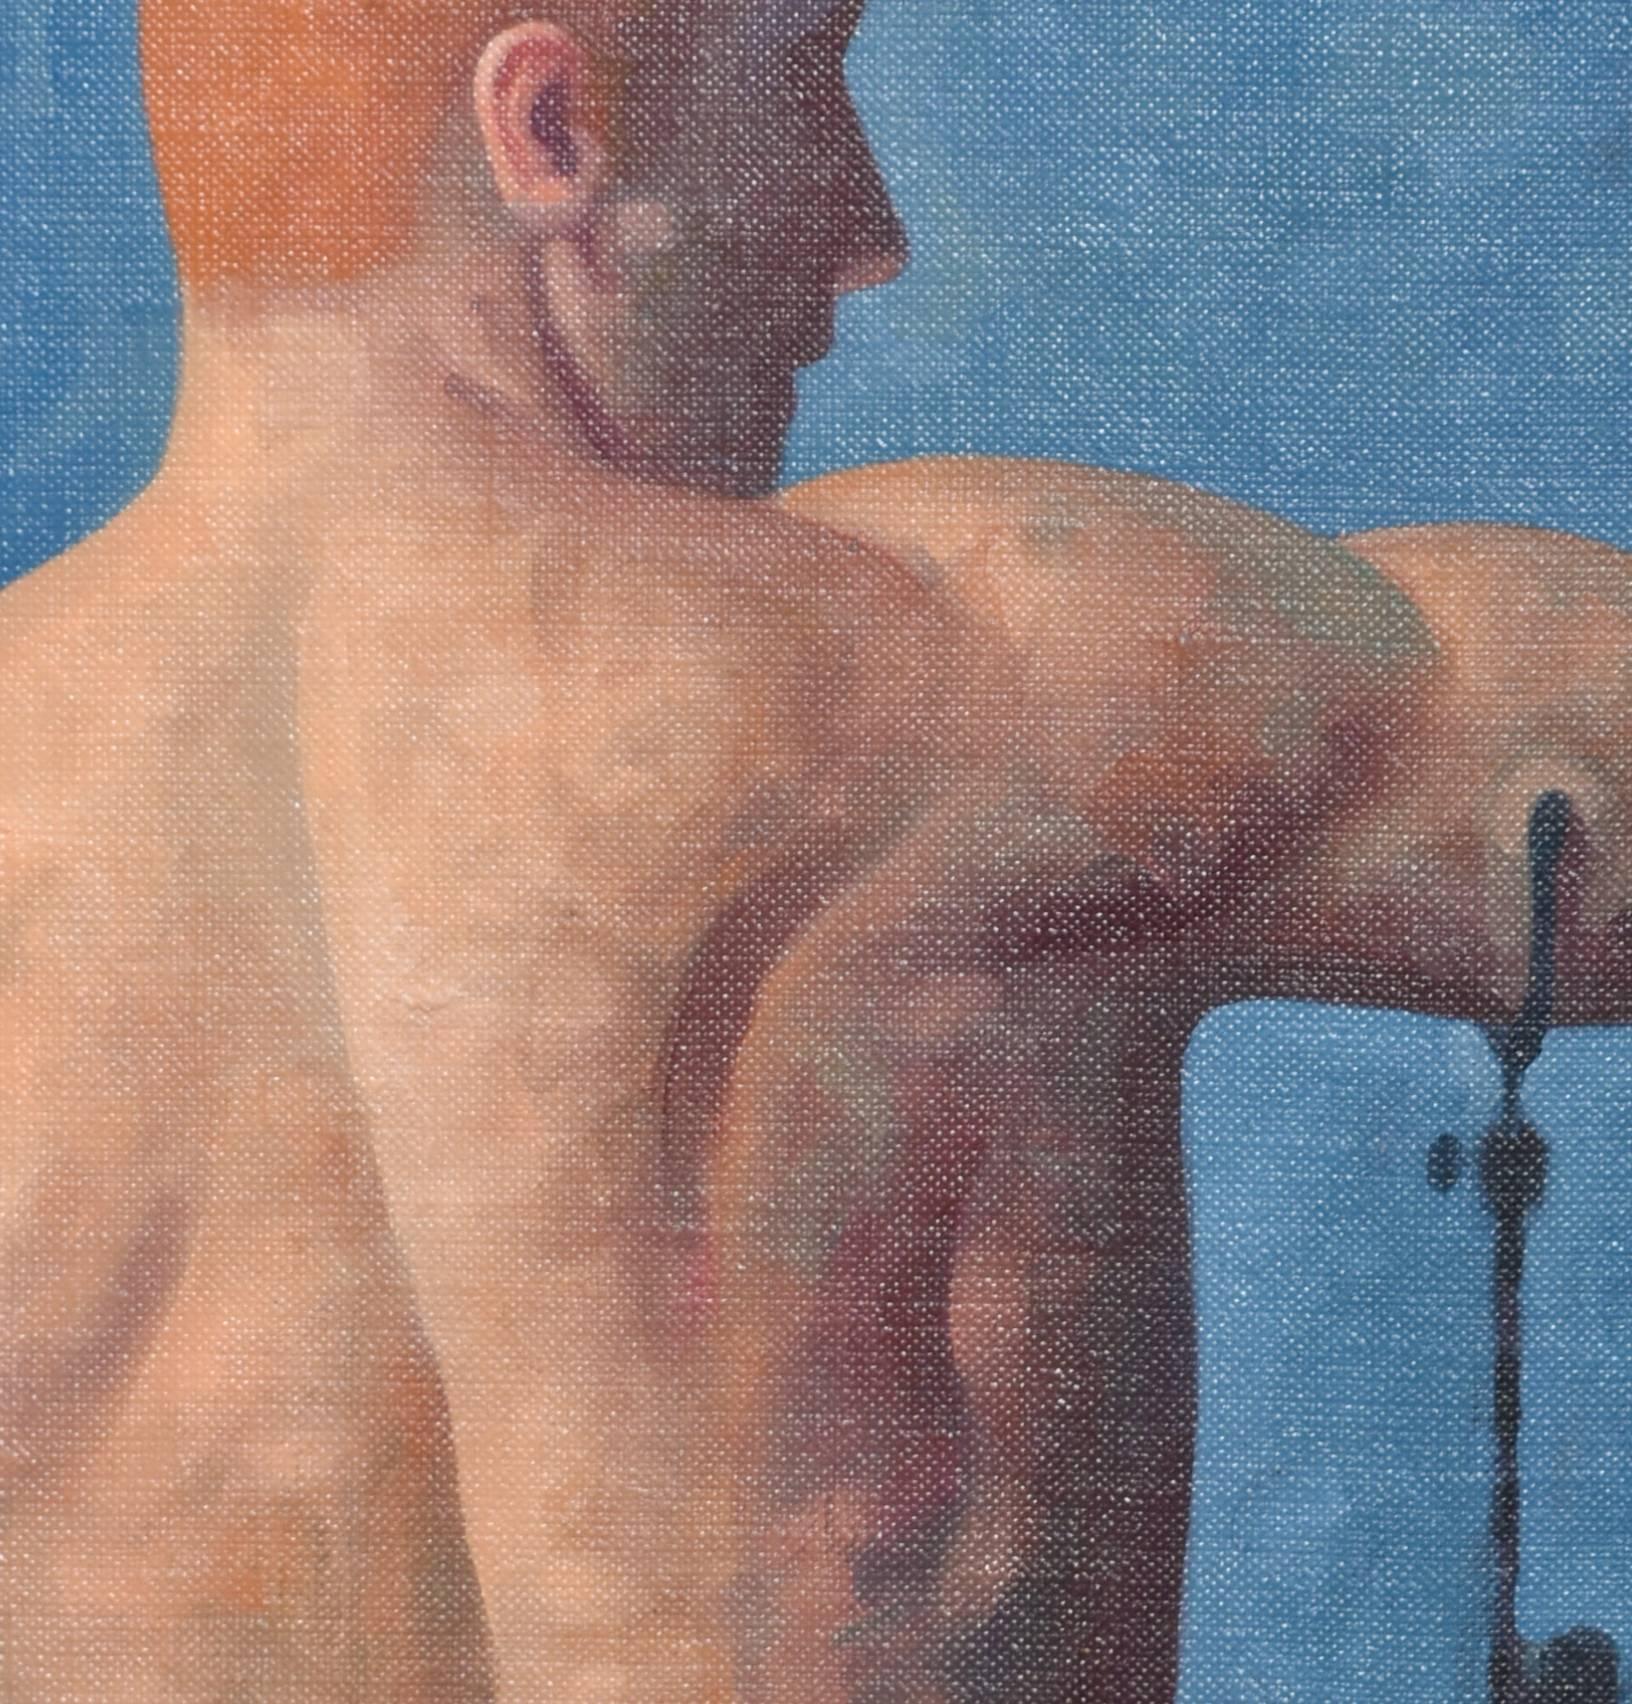 Figurative oil painting of nude male model on linen board
10 x 8 inches unframed, 13 x 11 x 1.5 inches in black frame

This contemporary figurative painting is one in a series of Anatomy Paintings created by the artist in 2017. Goldstrom focuses on